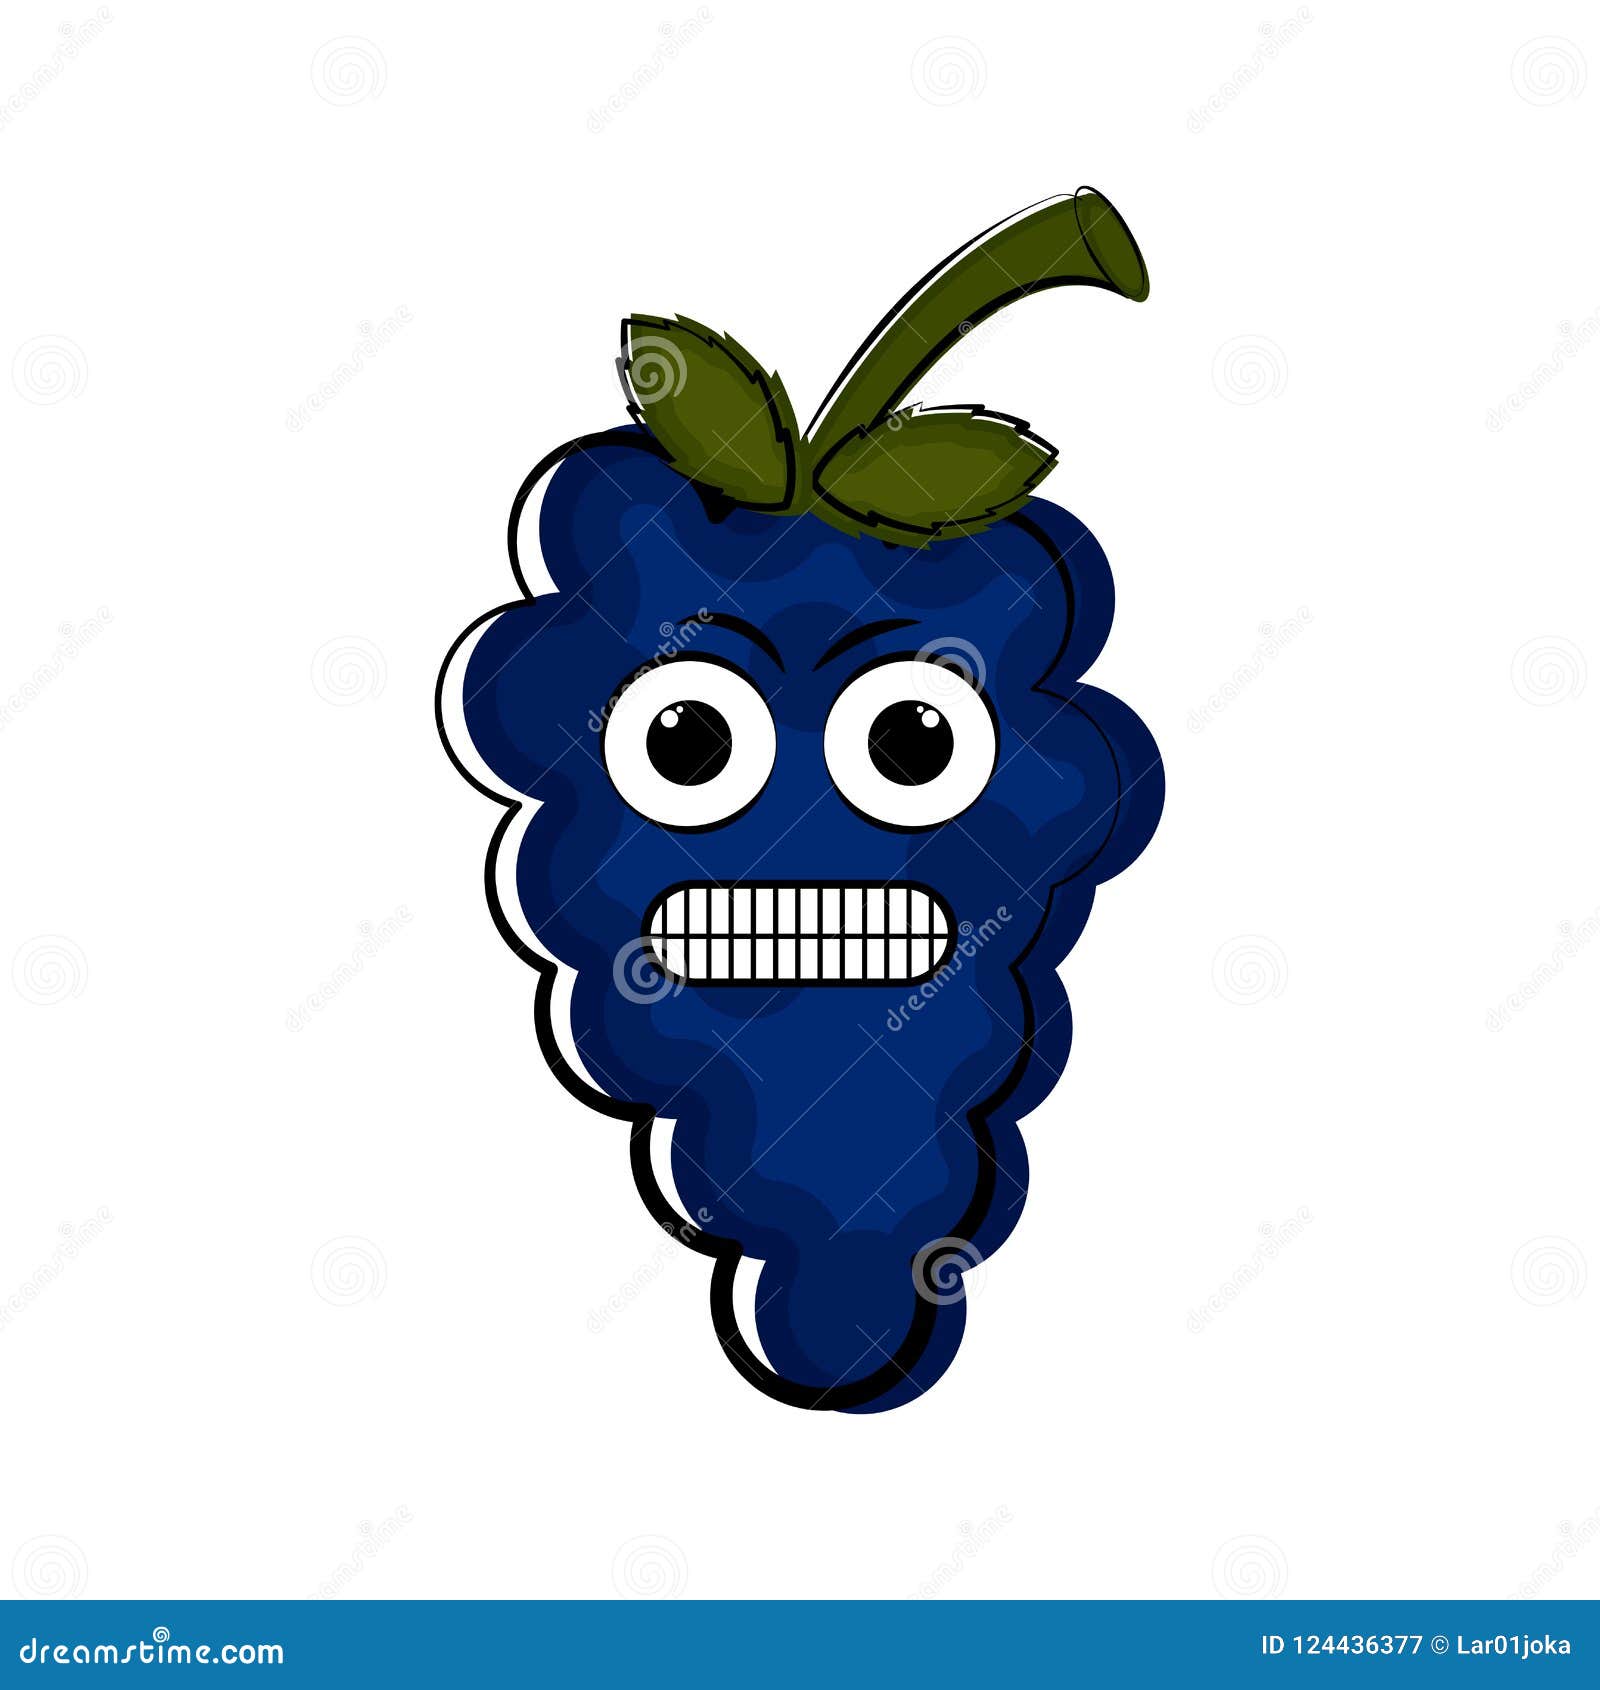 Angry Grapes Cartoon Character Emote Stock Vector - Illustration of ...